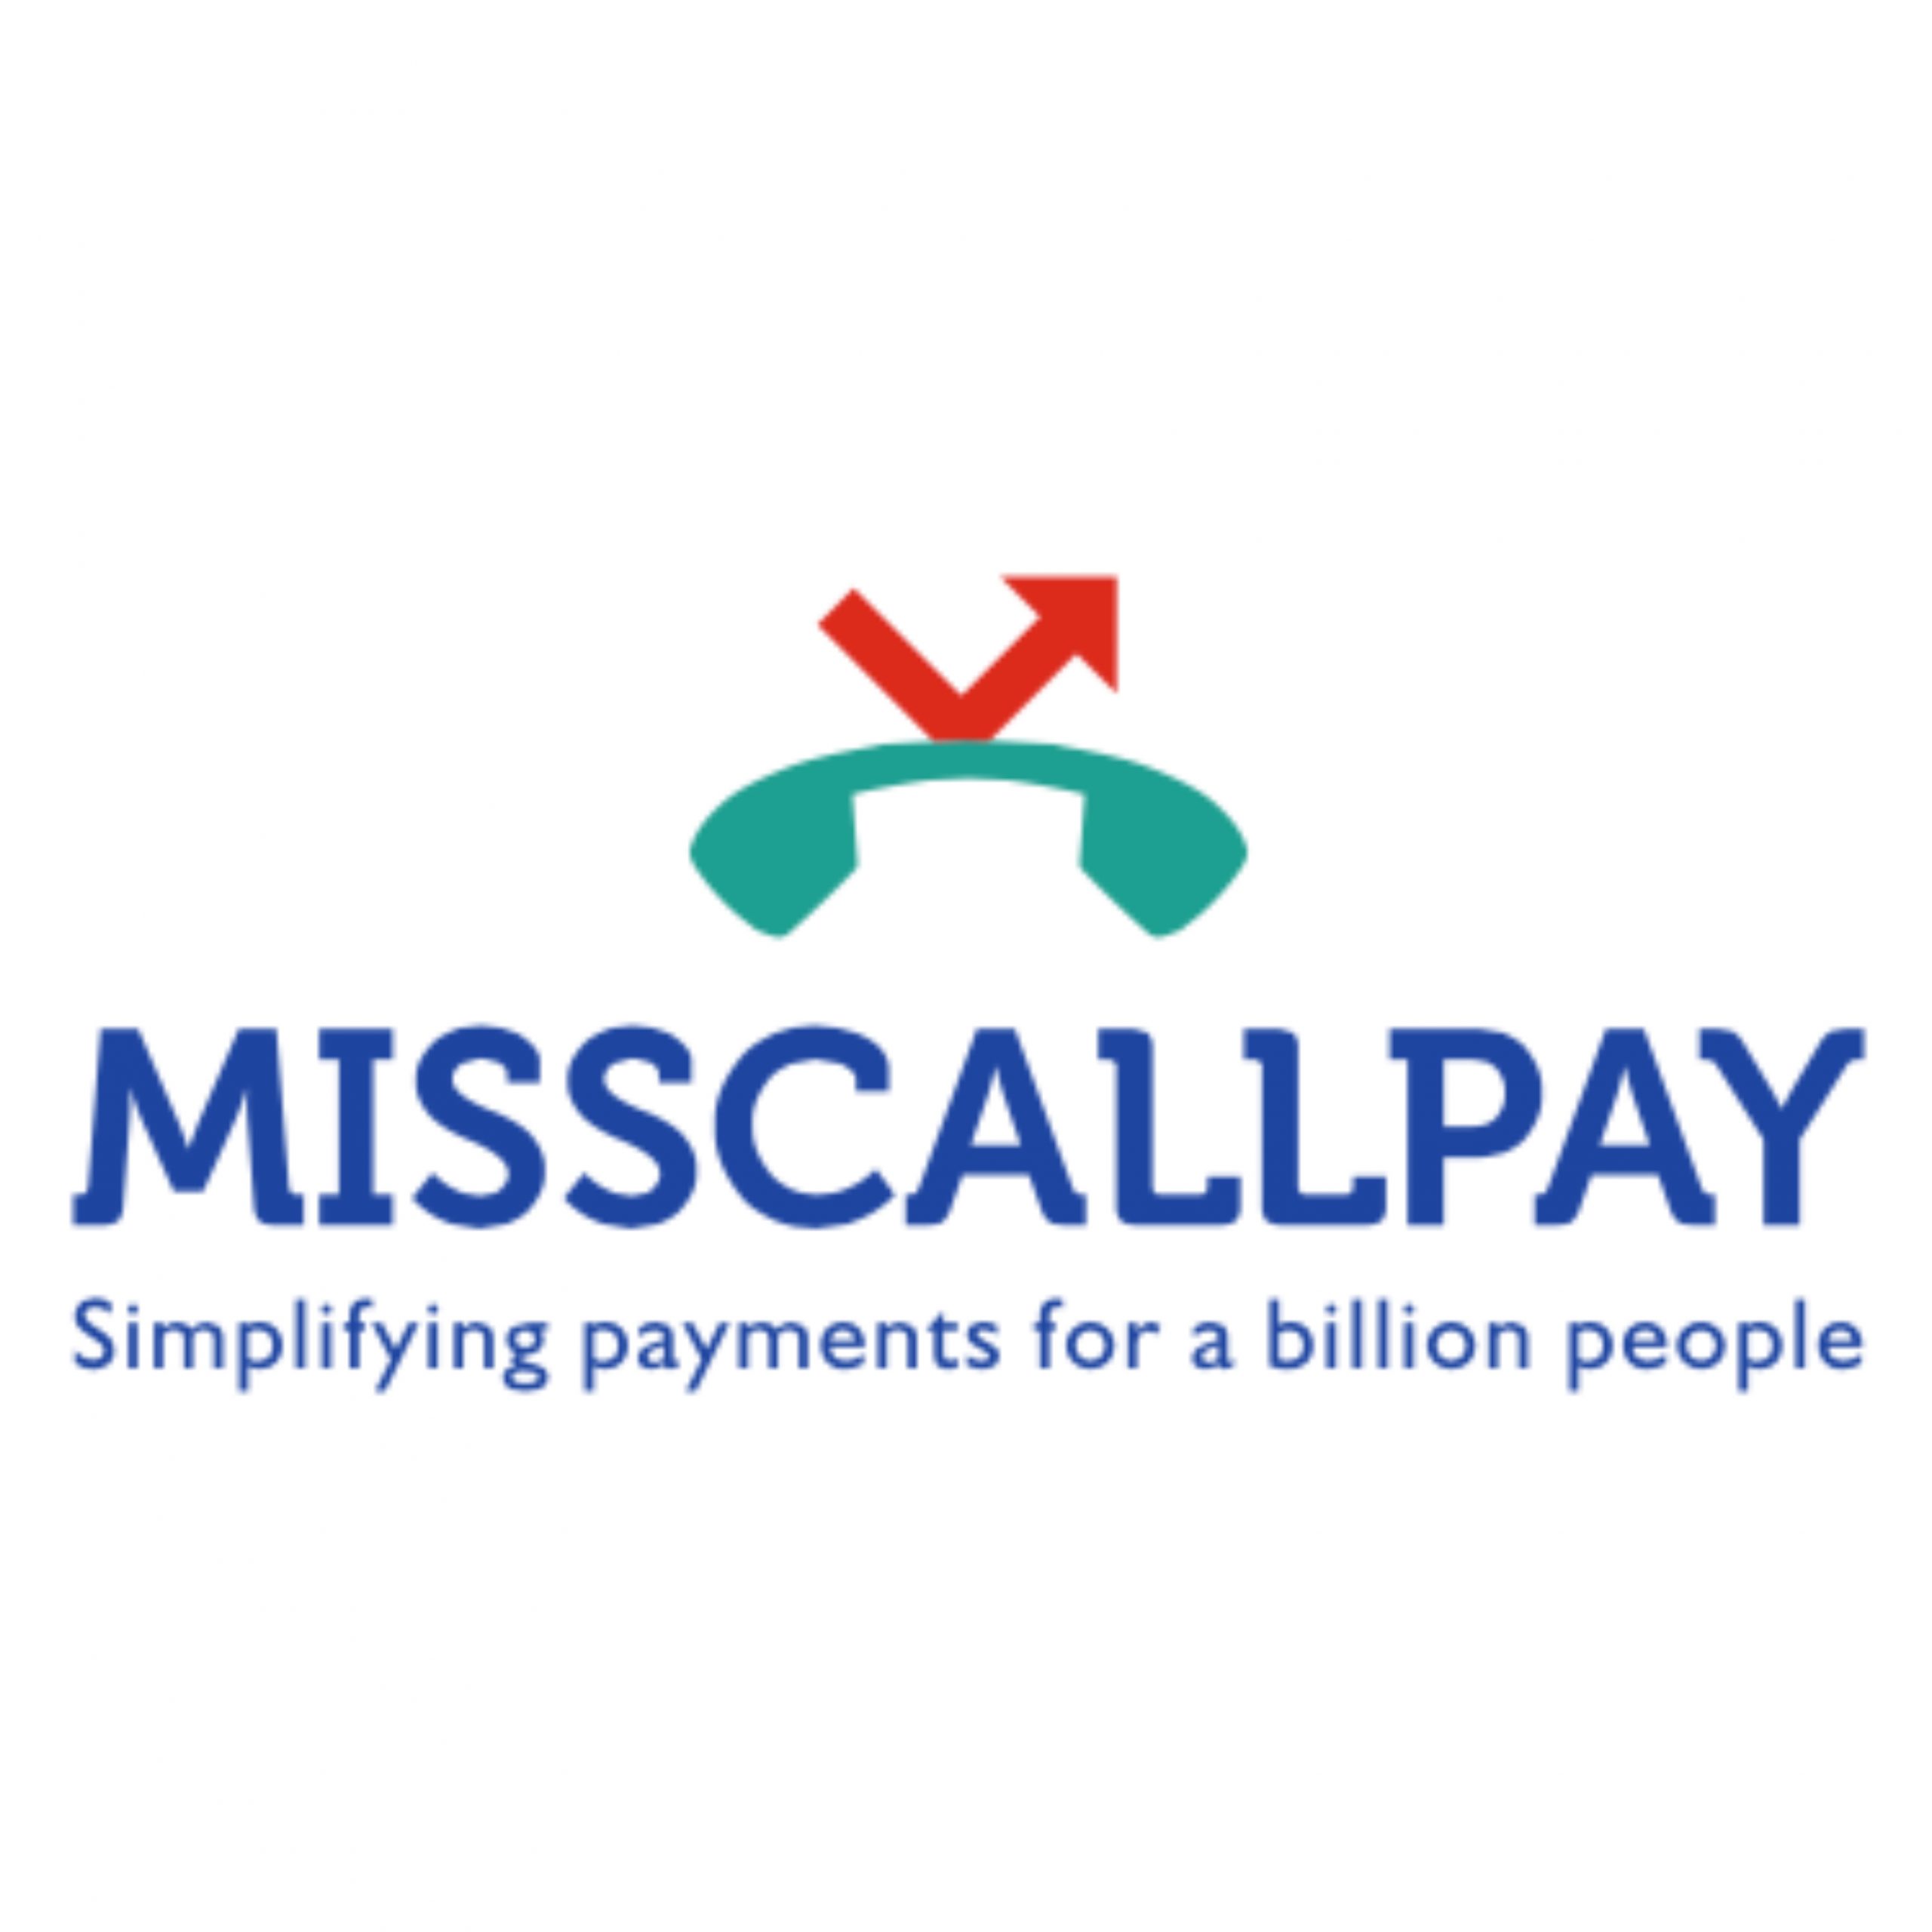 TiEcon 2022 felicitated MISSCALLPAY with ‘TiE50 2022 winner’, at its premier global conference-thumnail